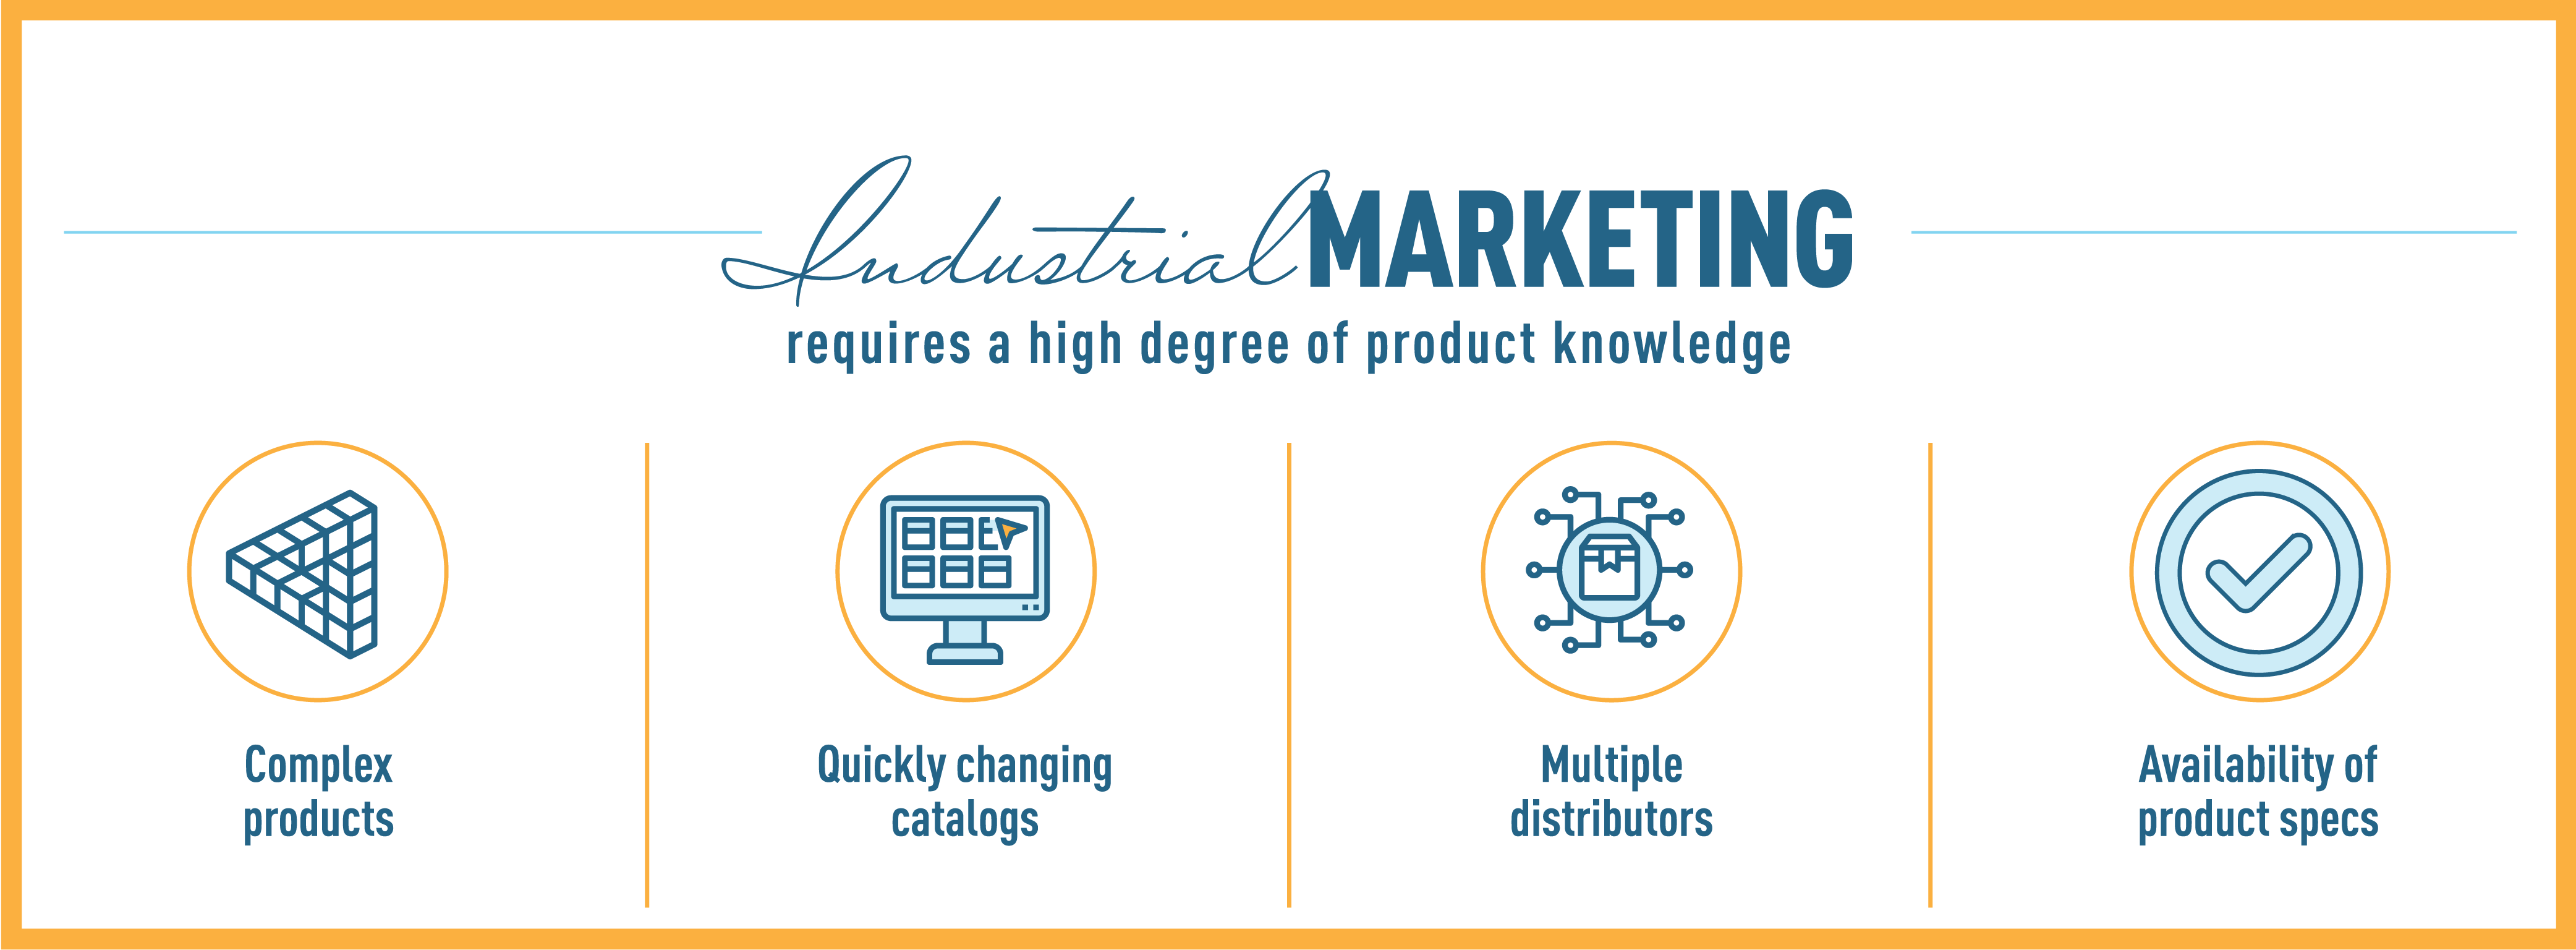 Industrial Marketing requires a high degree of product knowledge